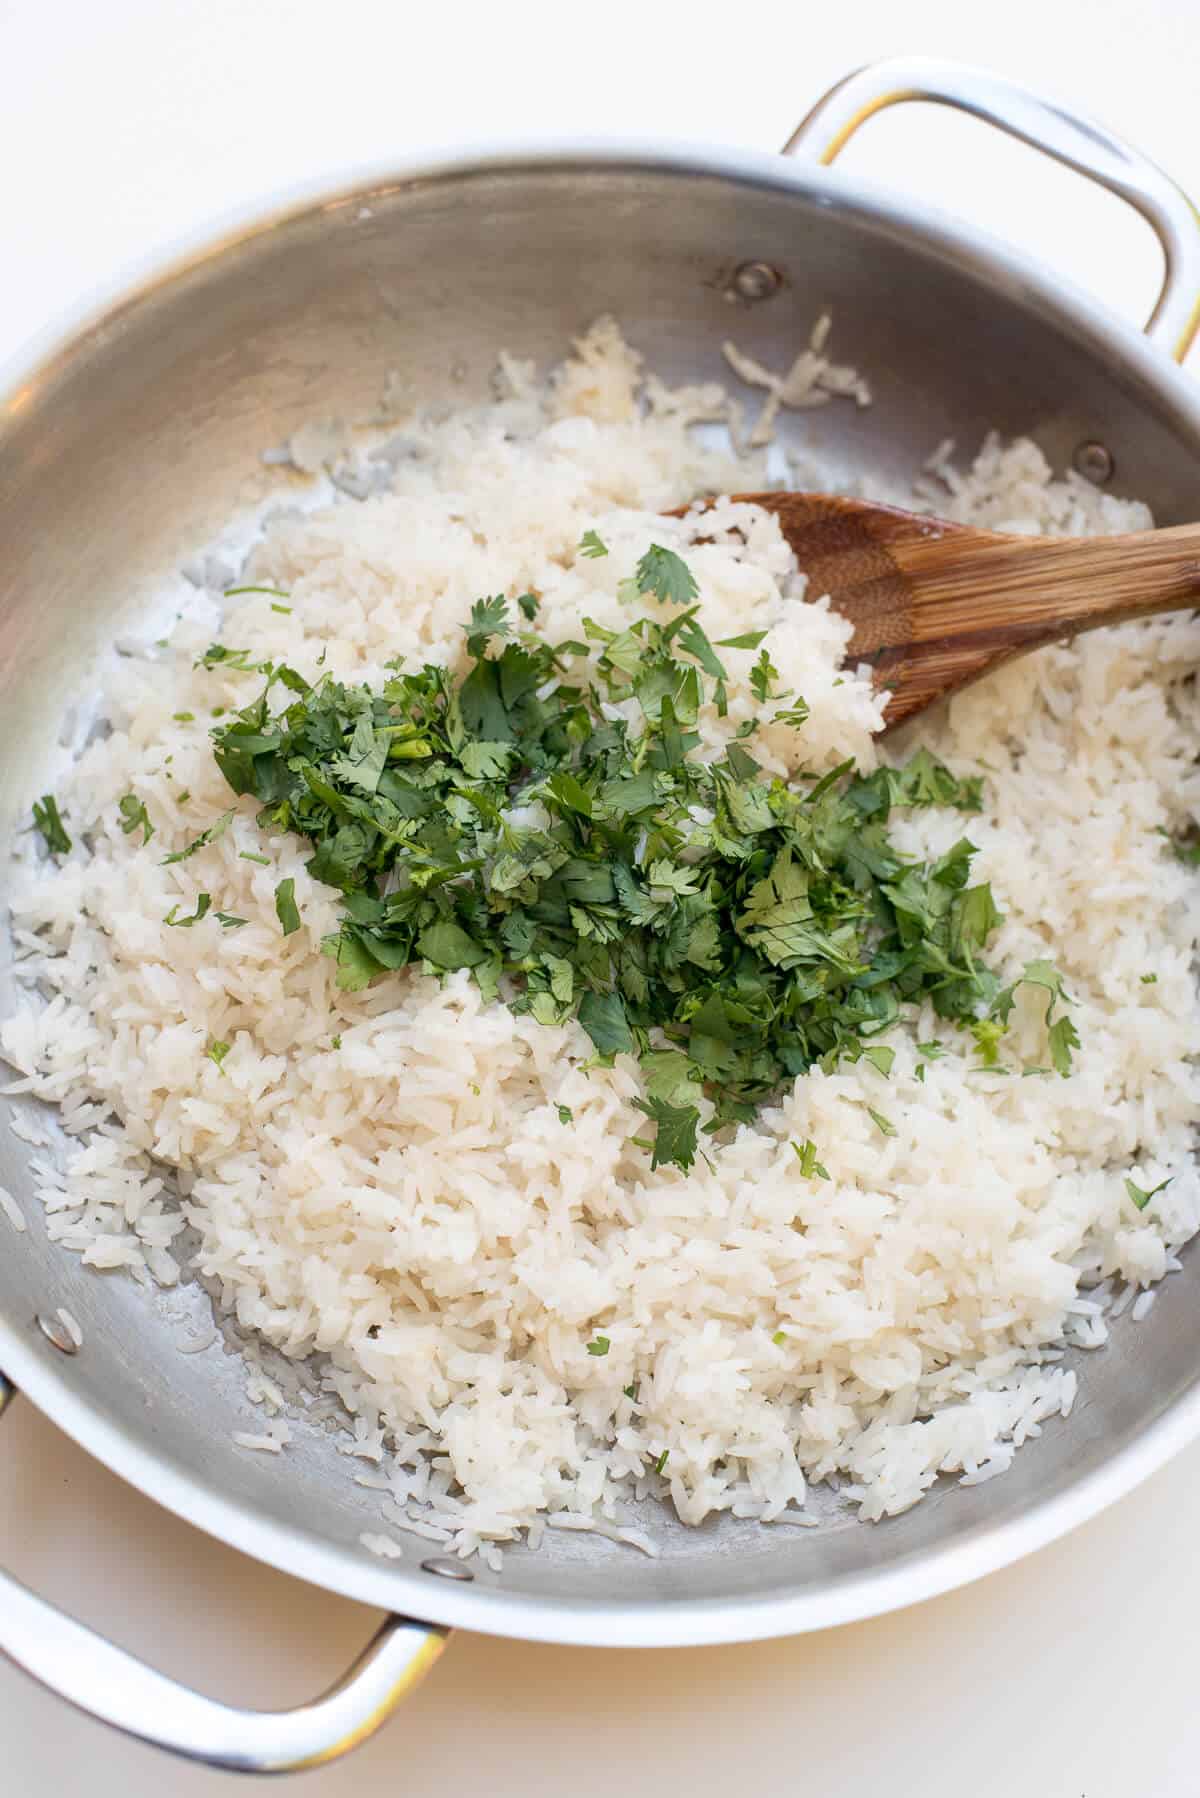 Cilantro is stirred into rice in a stainless steel skillet.